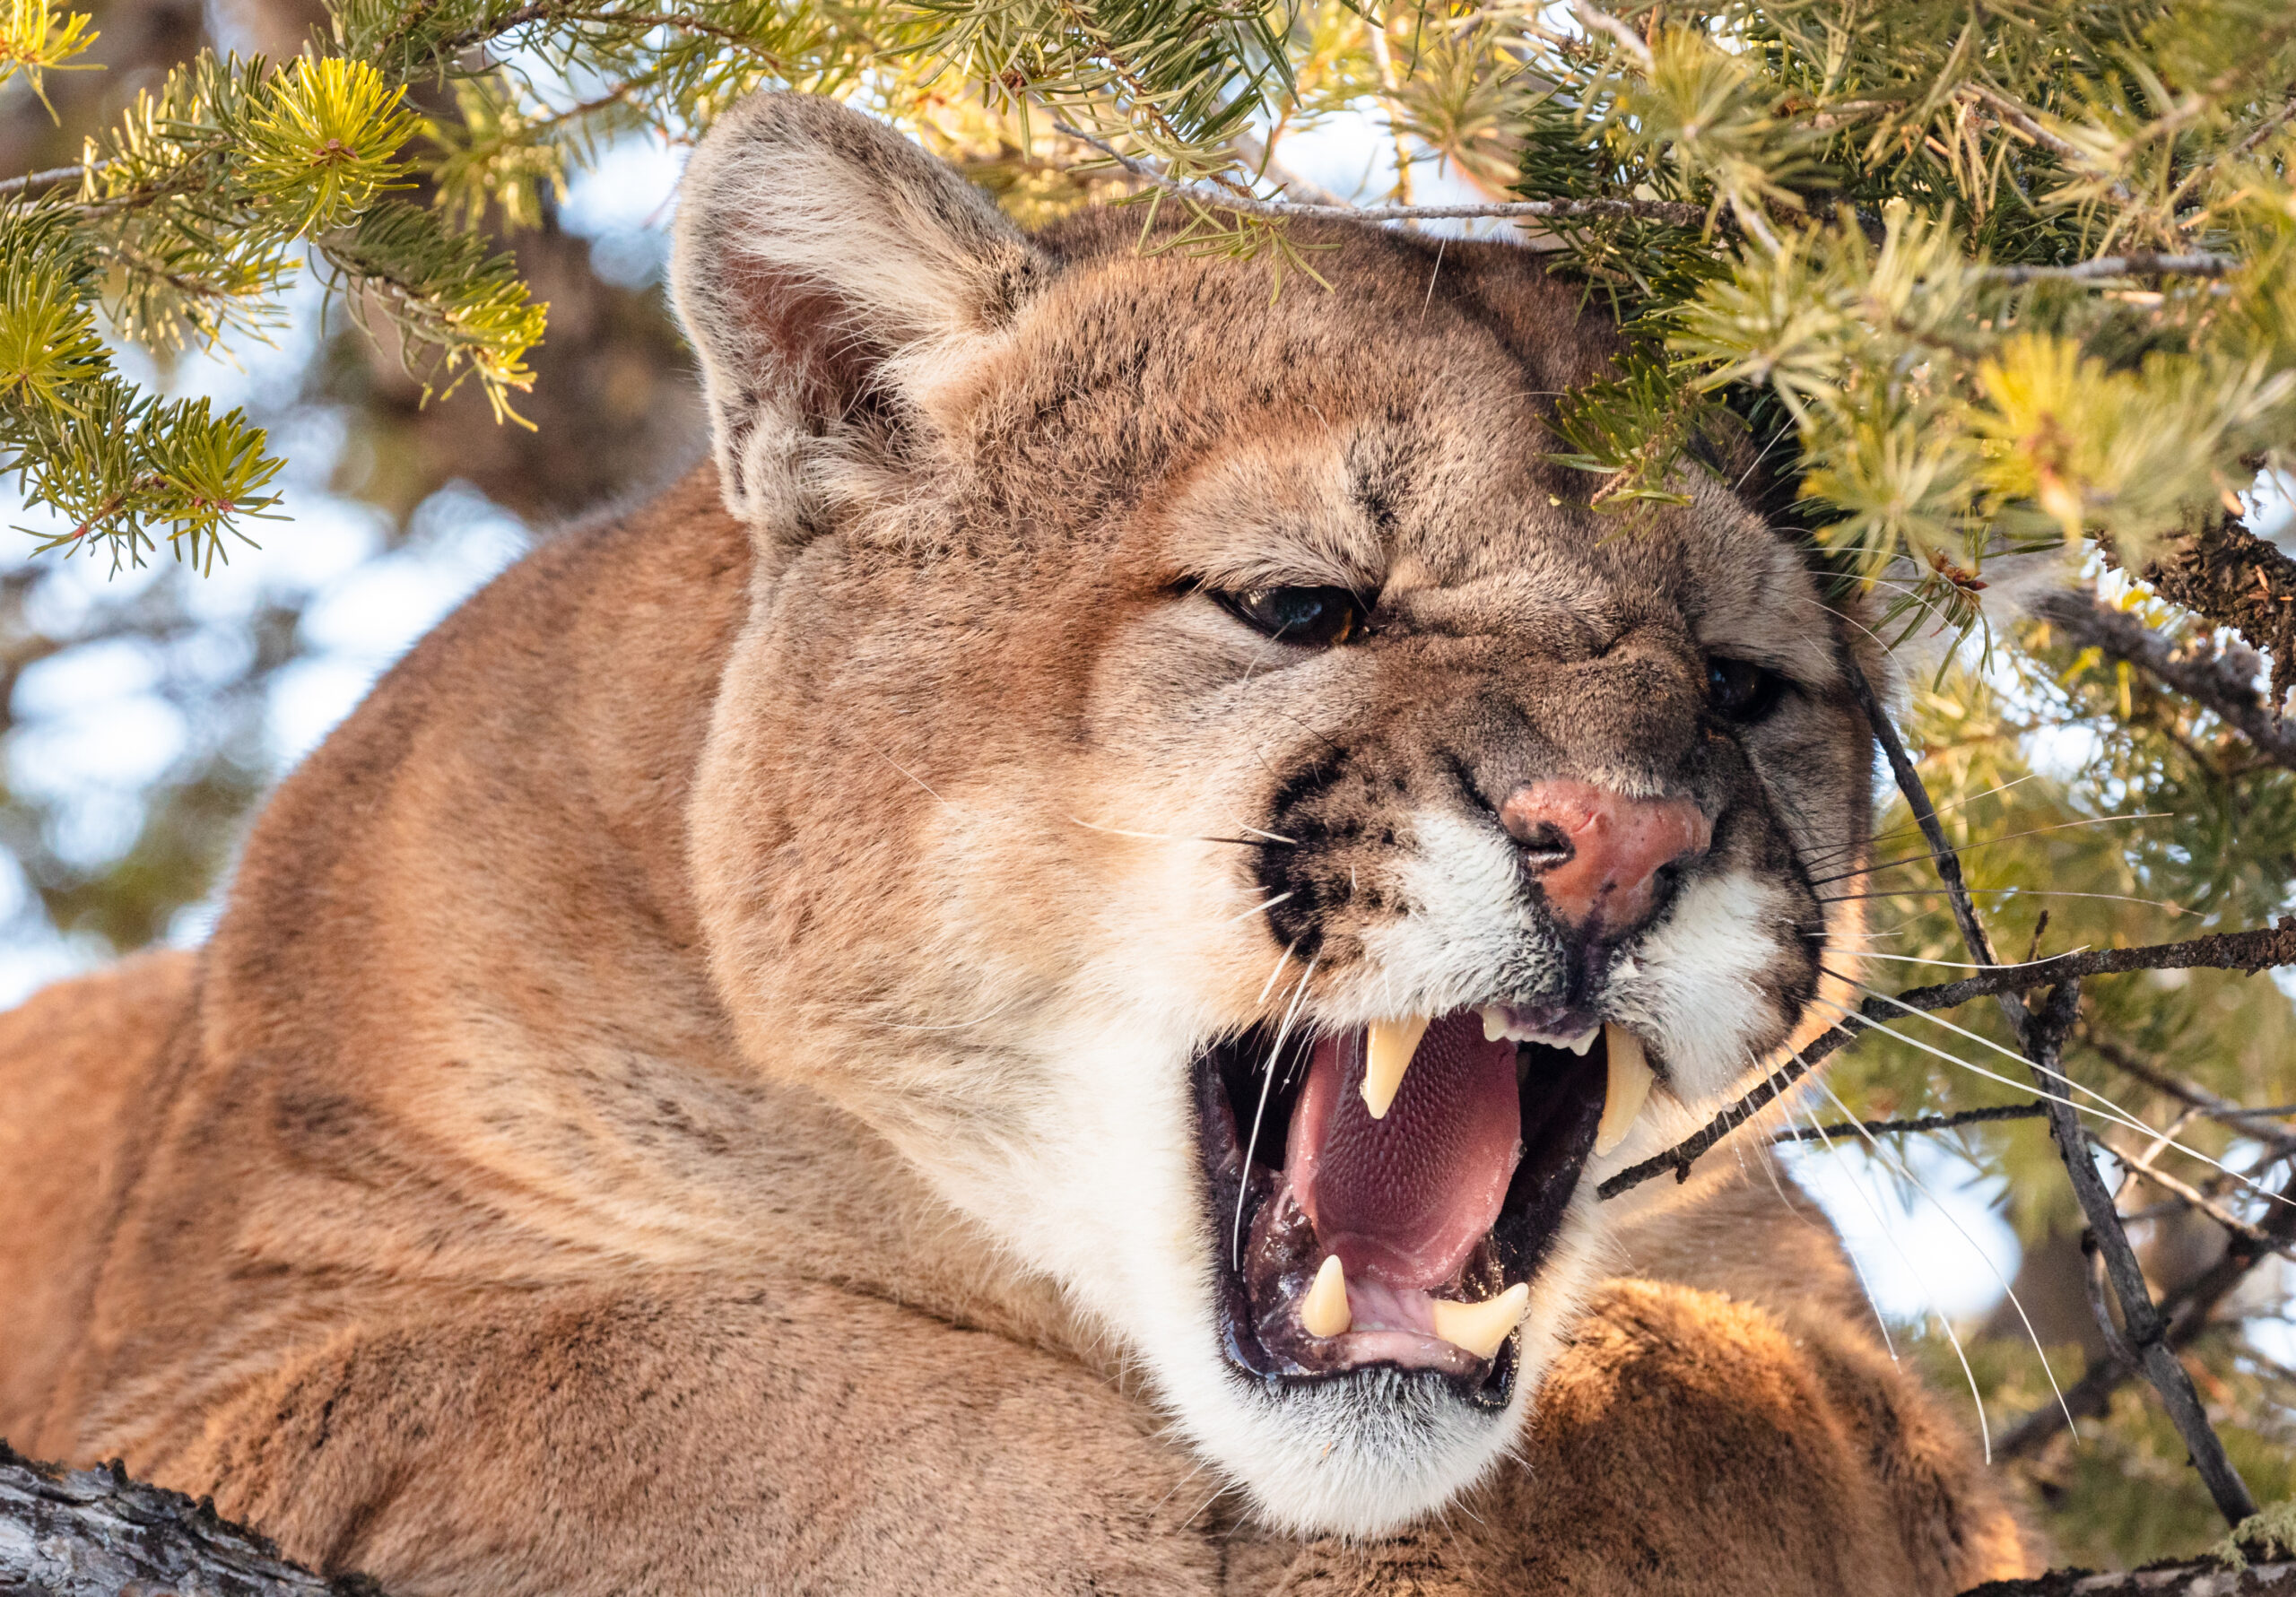 A mountain lion attacked a dog in British Columbia.